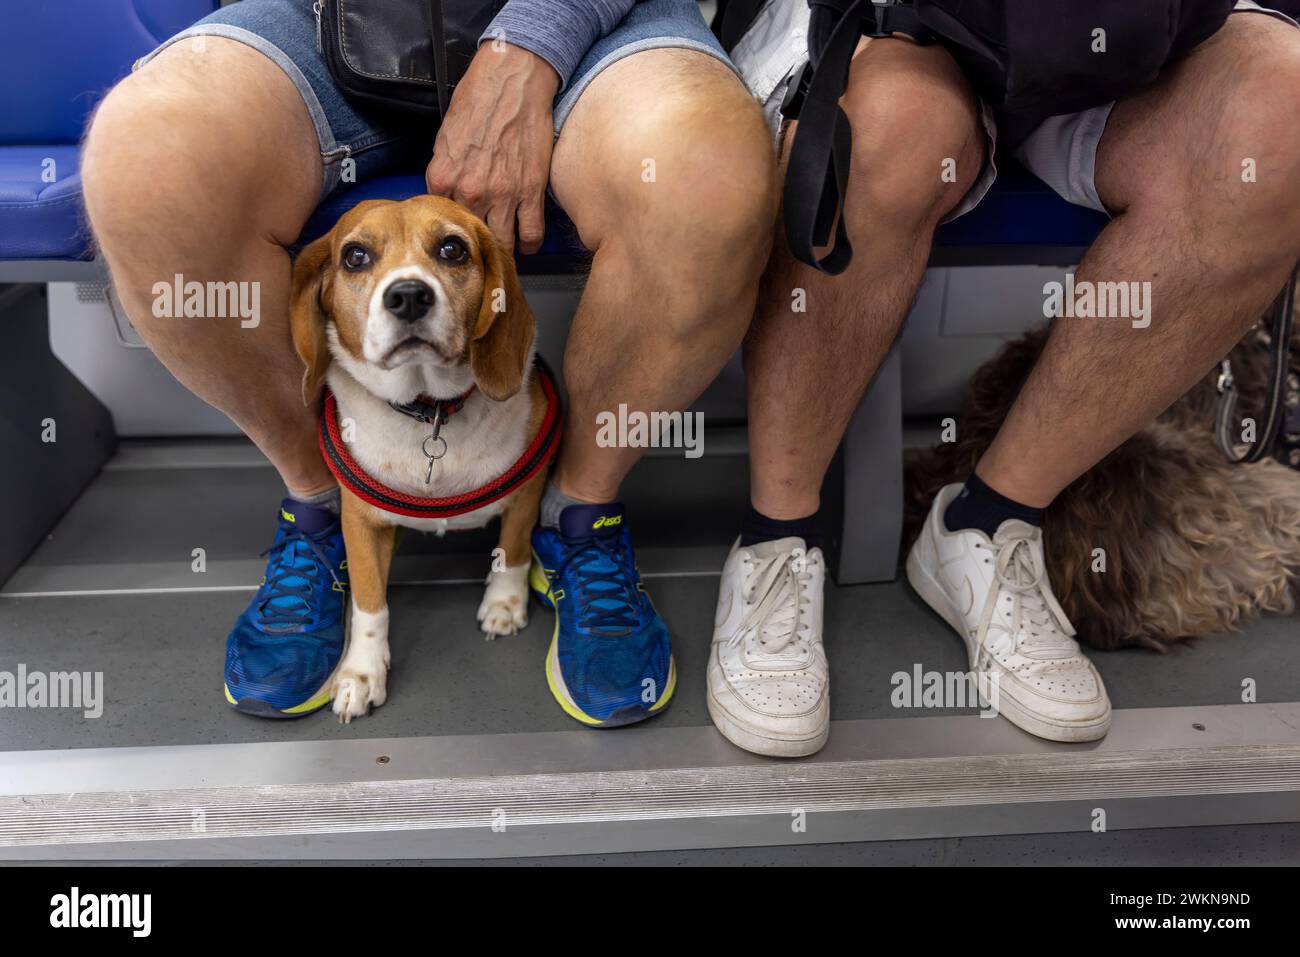 Dogs on a train from La Spezia, a jumping off point for people traveling to Cinque Terre in Liguria, Italy. Stock Photo